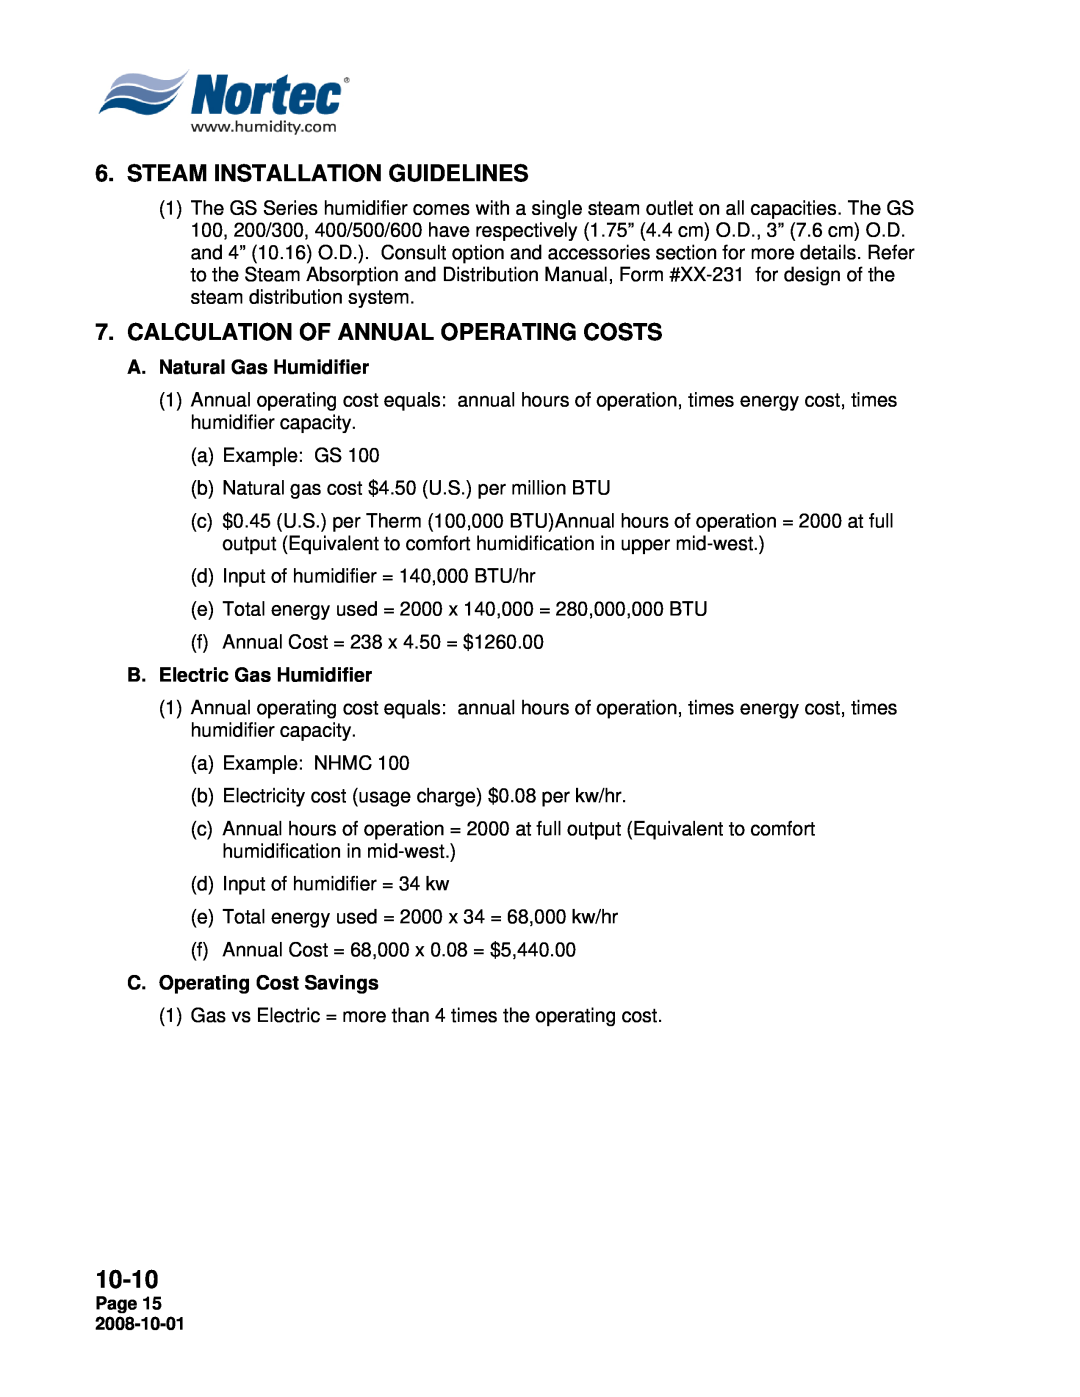 Nortec Industries GSTC Indoor, GSTC Outdoor Steam Installation Guidelines, Calculation Of Annual Operating Costs, 10-10 